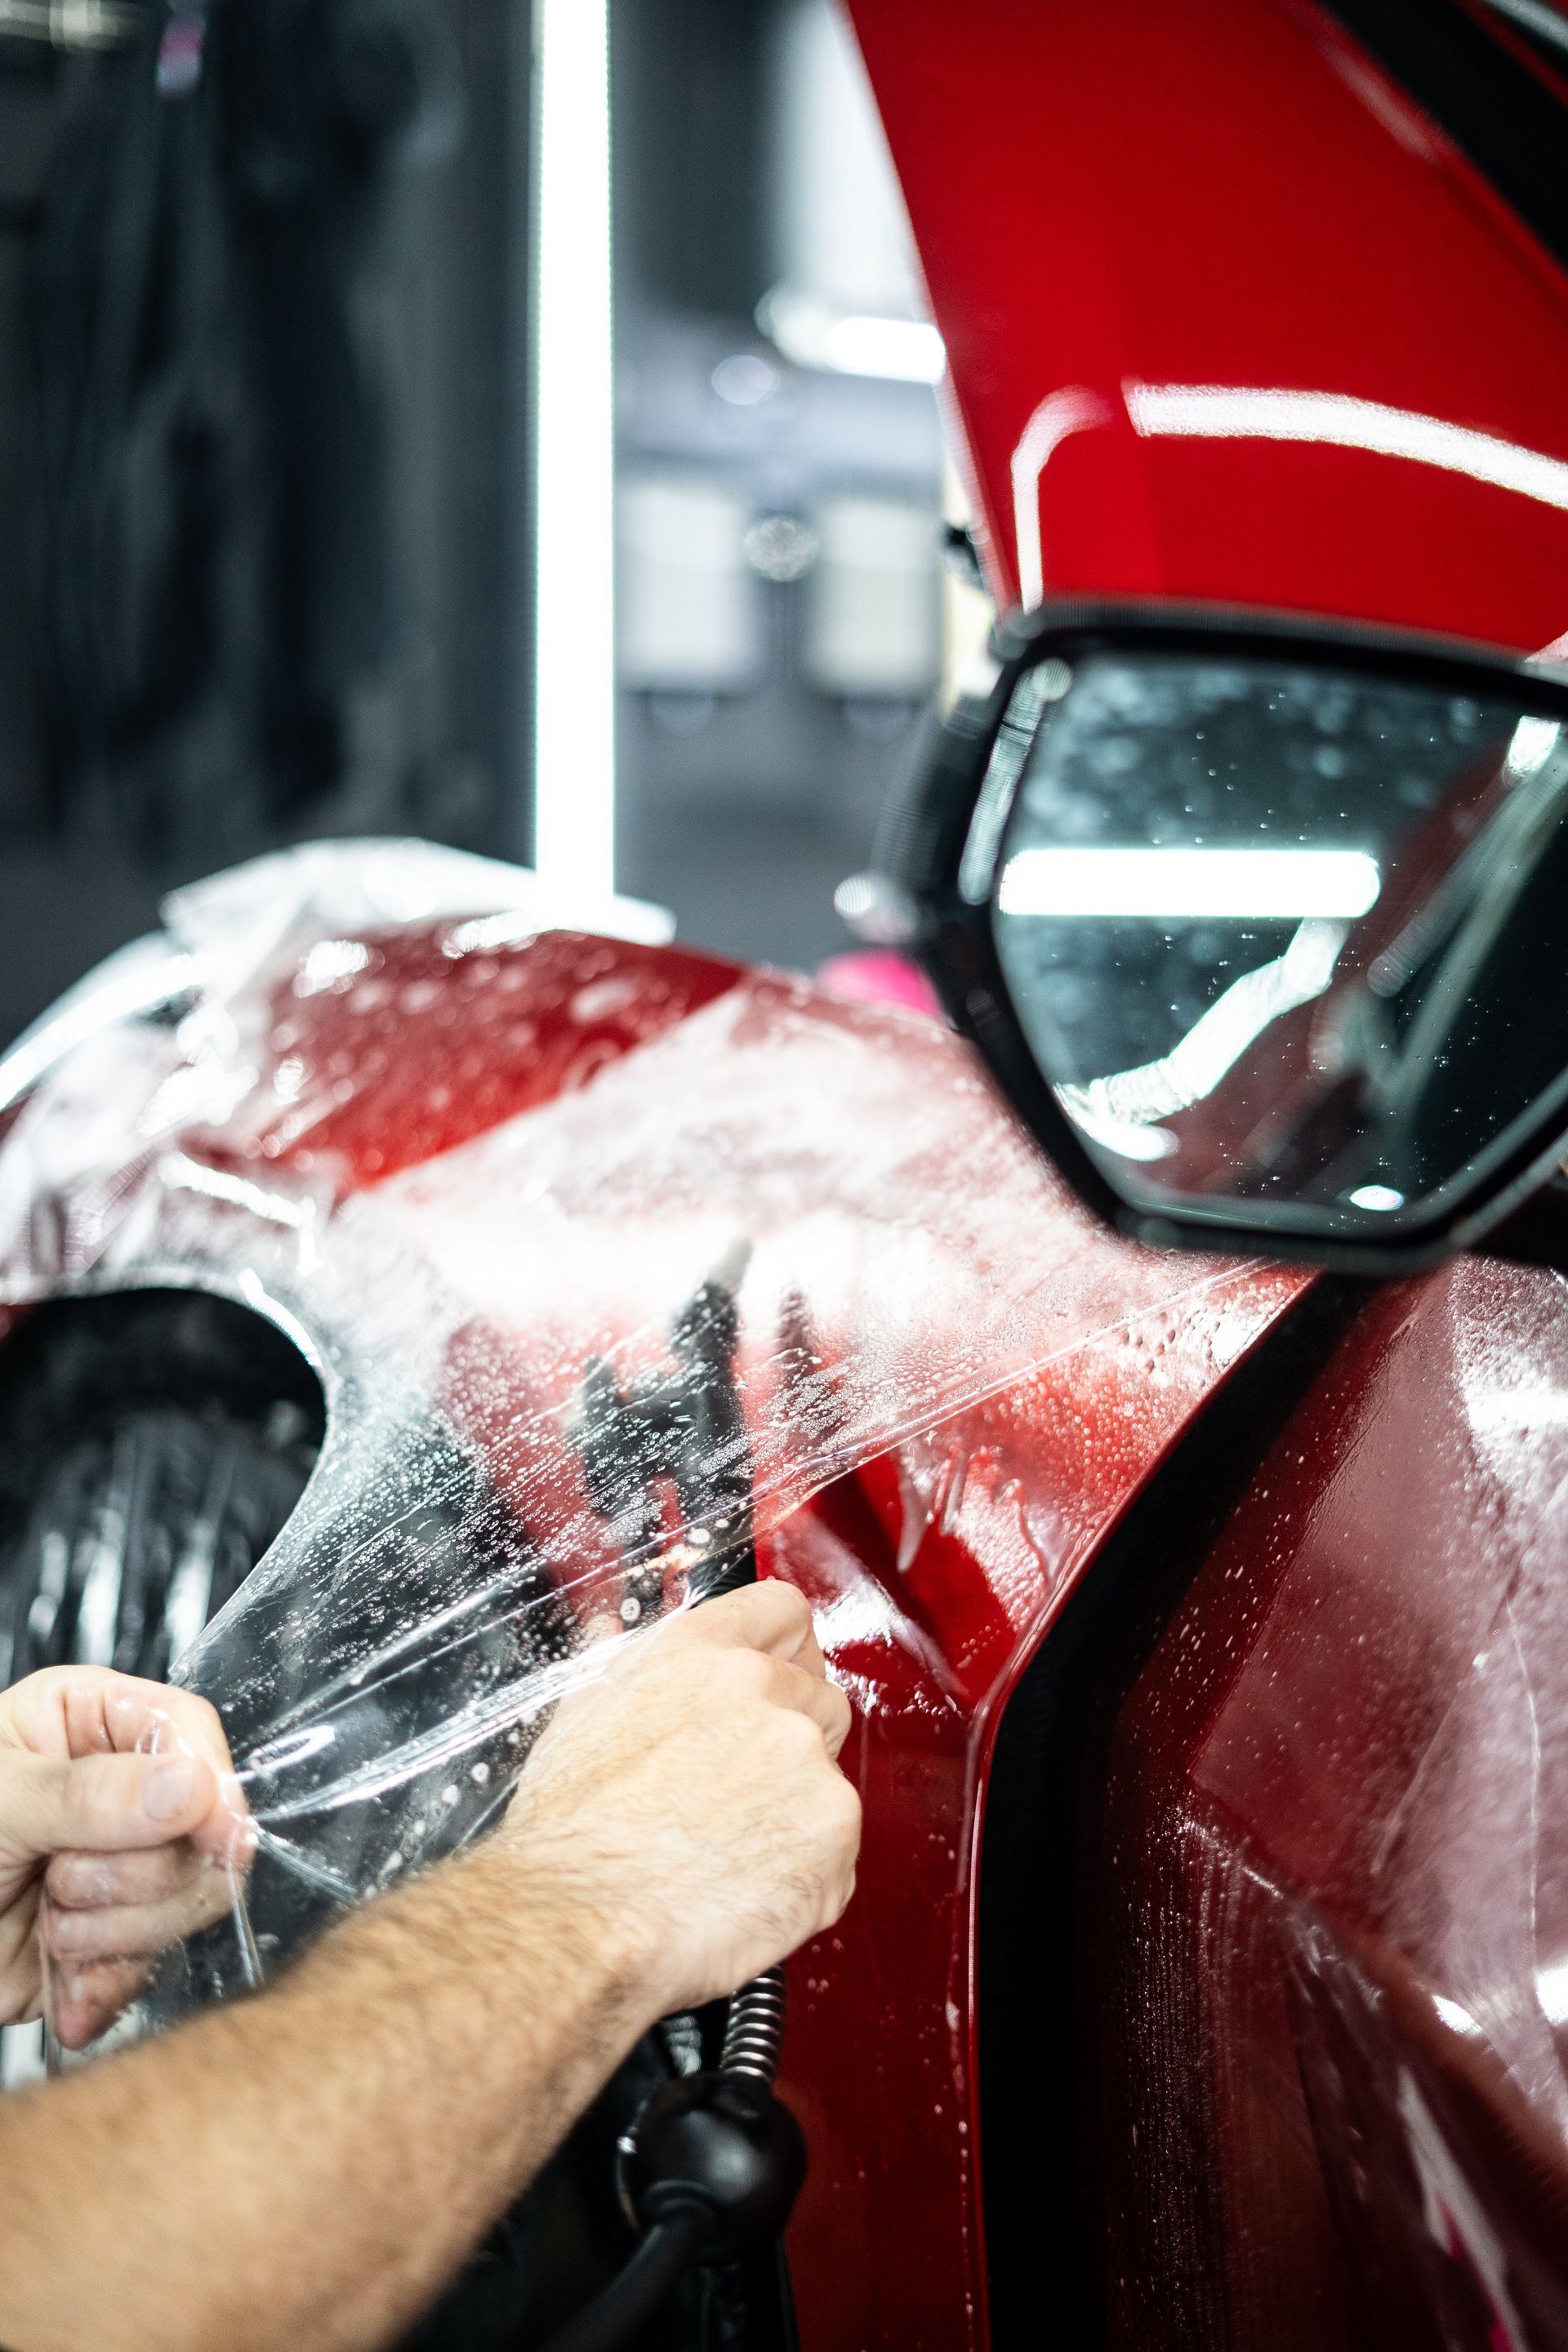 A man is wrapping a red car with plastic wrap.